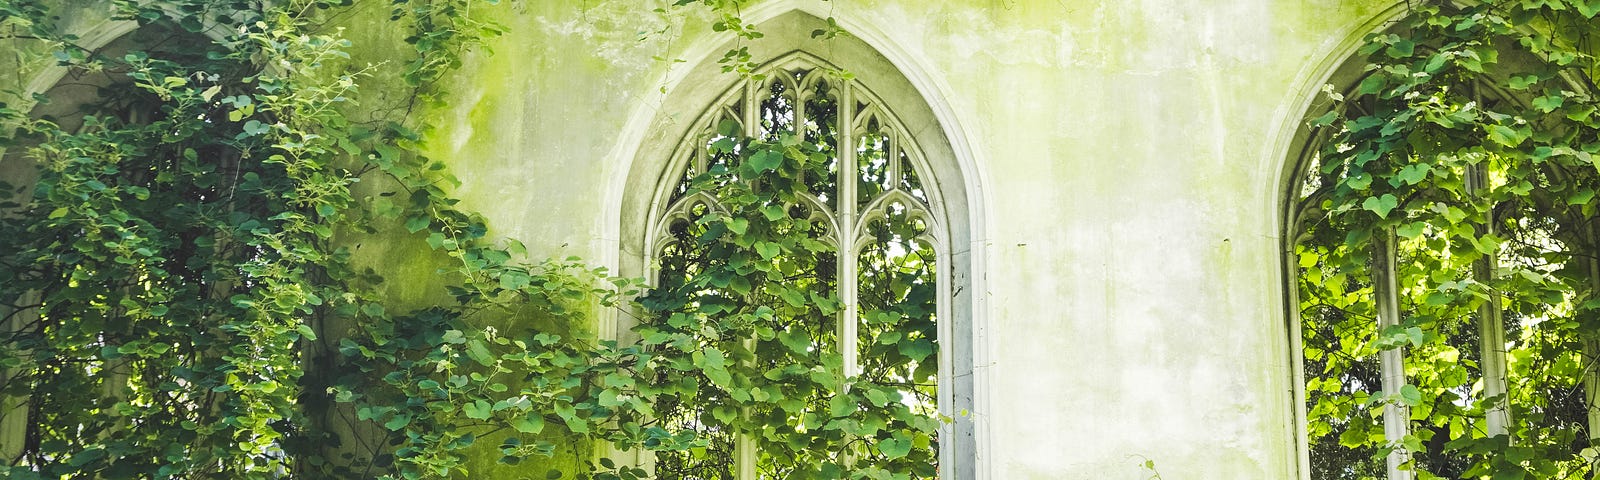 A beautiful white wall with arched windows, covered with greenery.